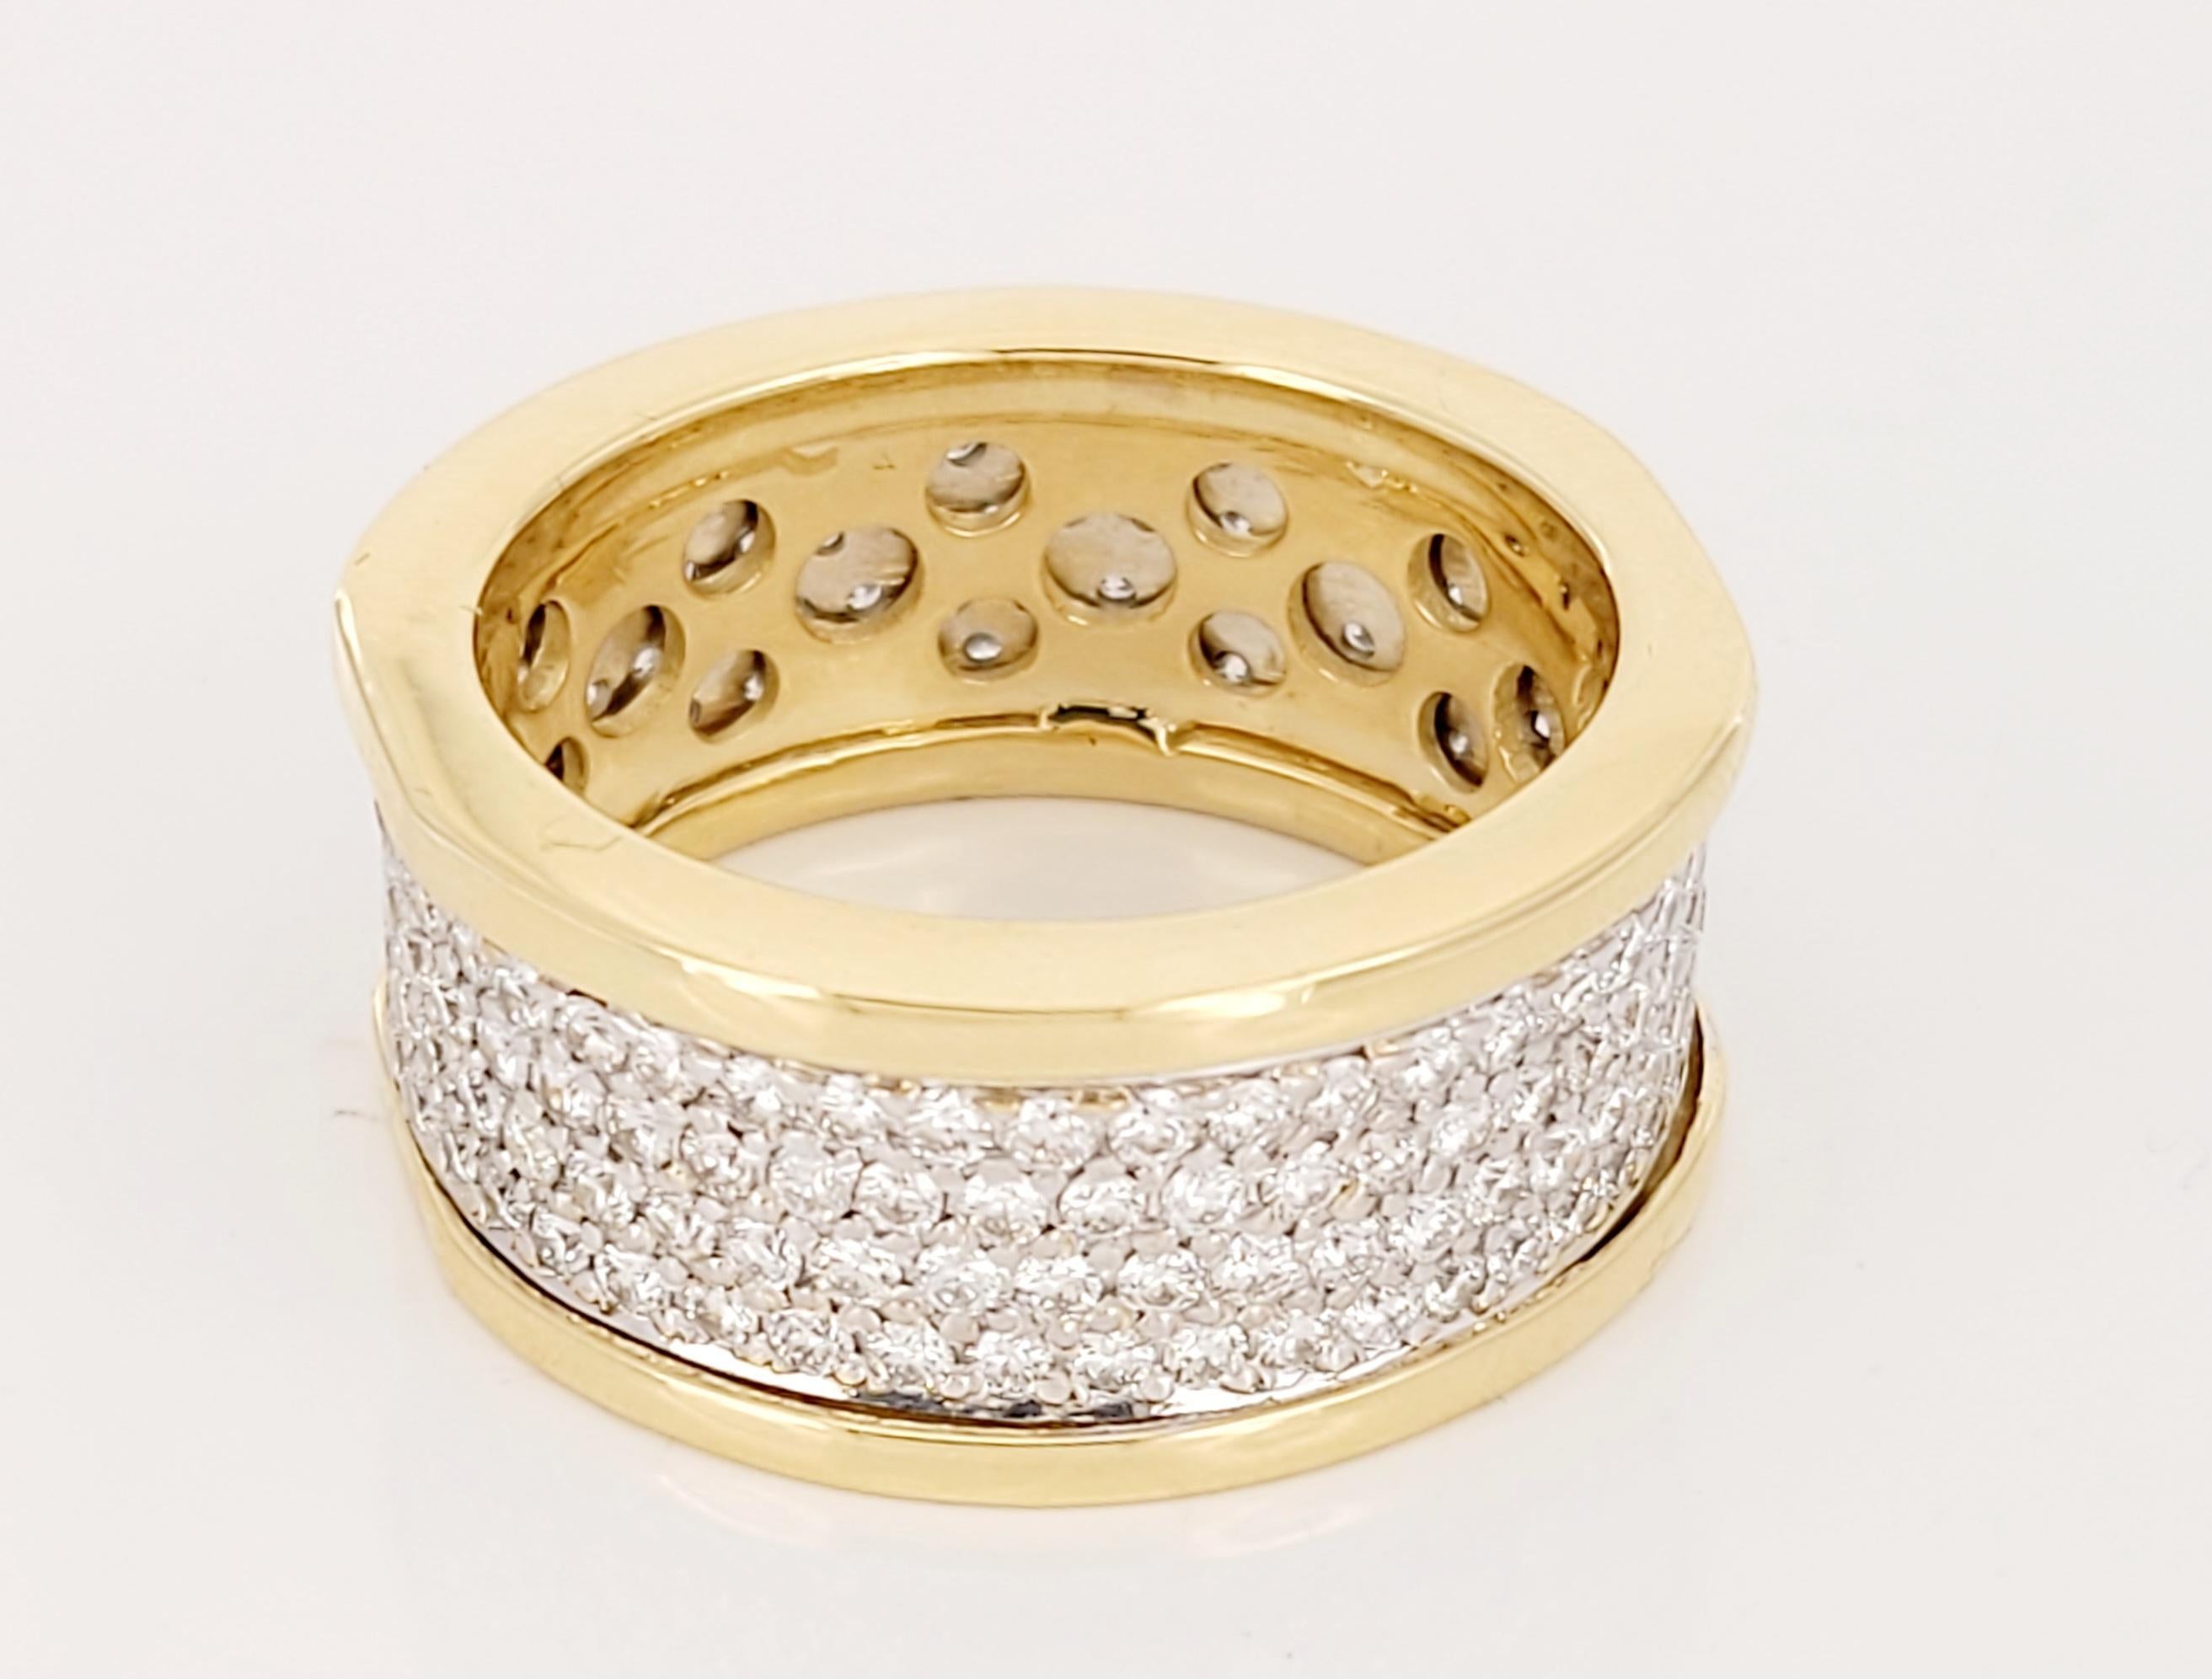 Hand Made Men's 18K Yellow Gold Ring with Diamonds Size 13 In New Condition For Sale In New York, NY